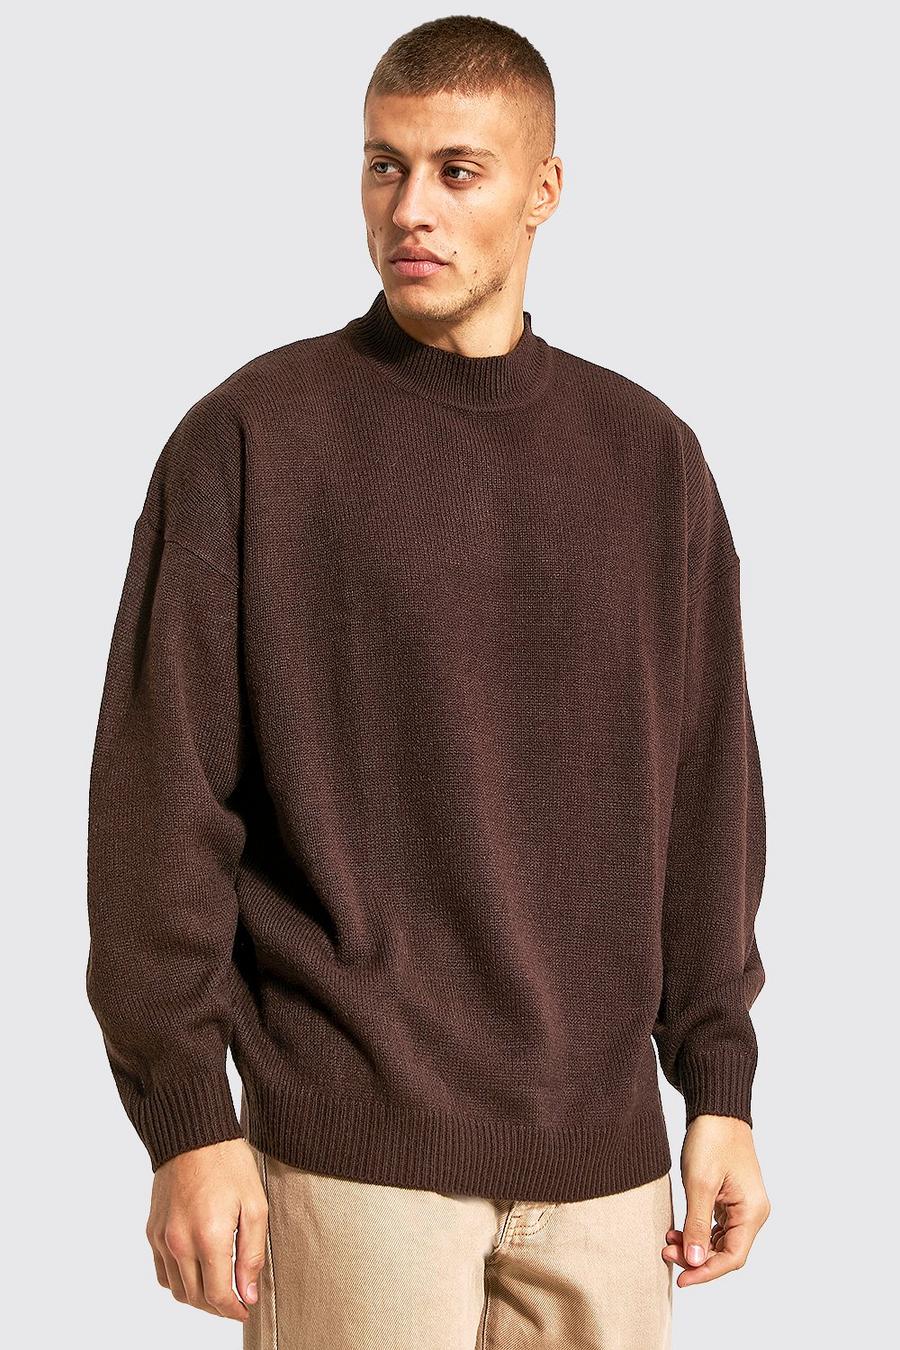 Chocolate brun Oversized Extended Neck Knitted Jumper